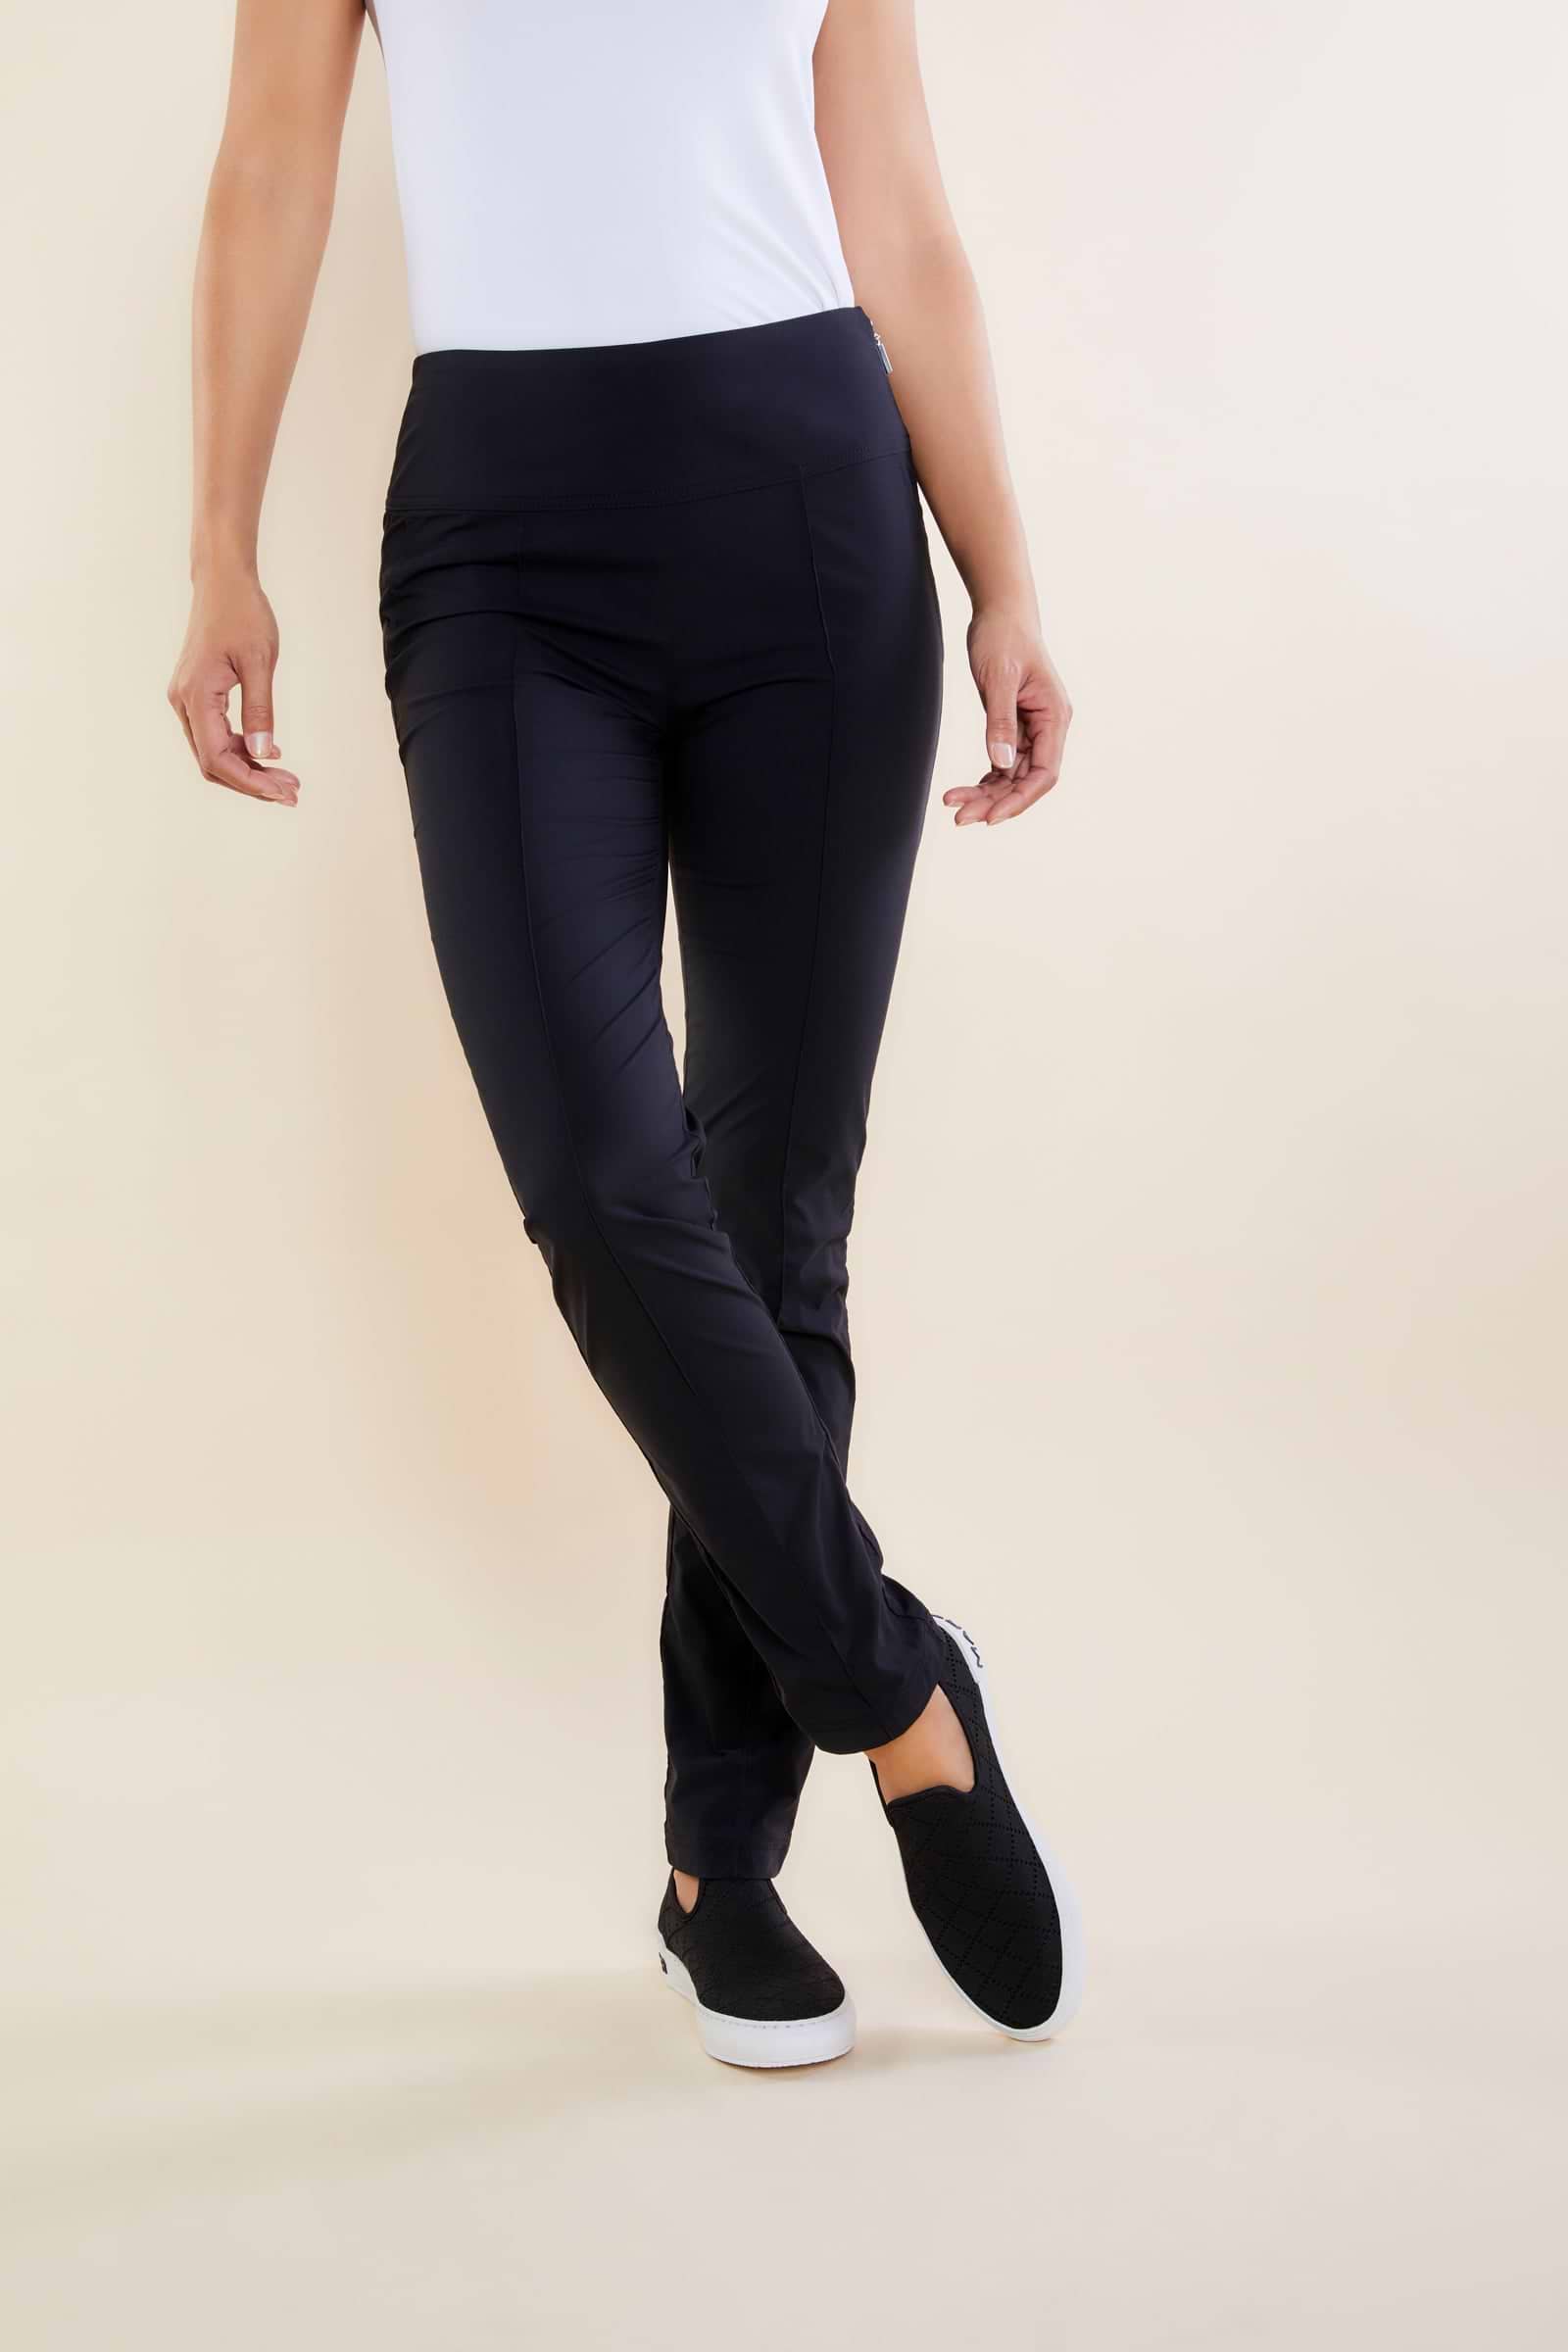 The Best Travel Pants. Front Profile of the Sonia Curvy High Rise Pant in Black